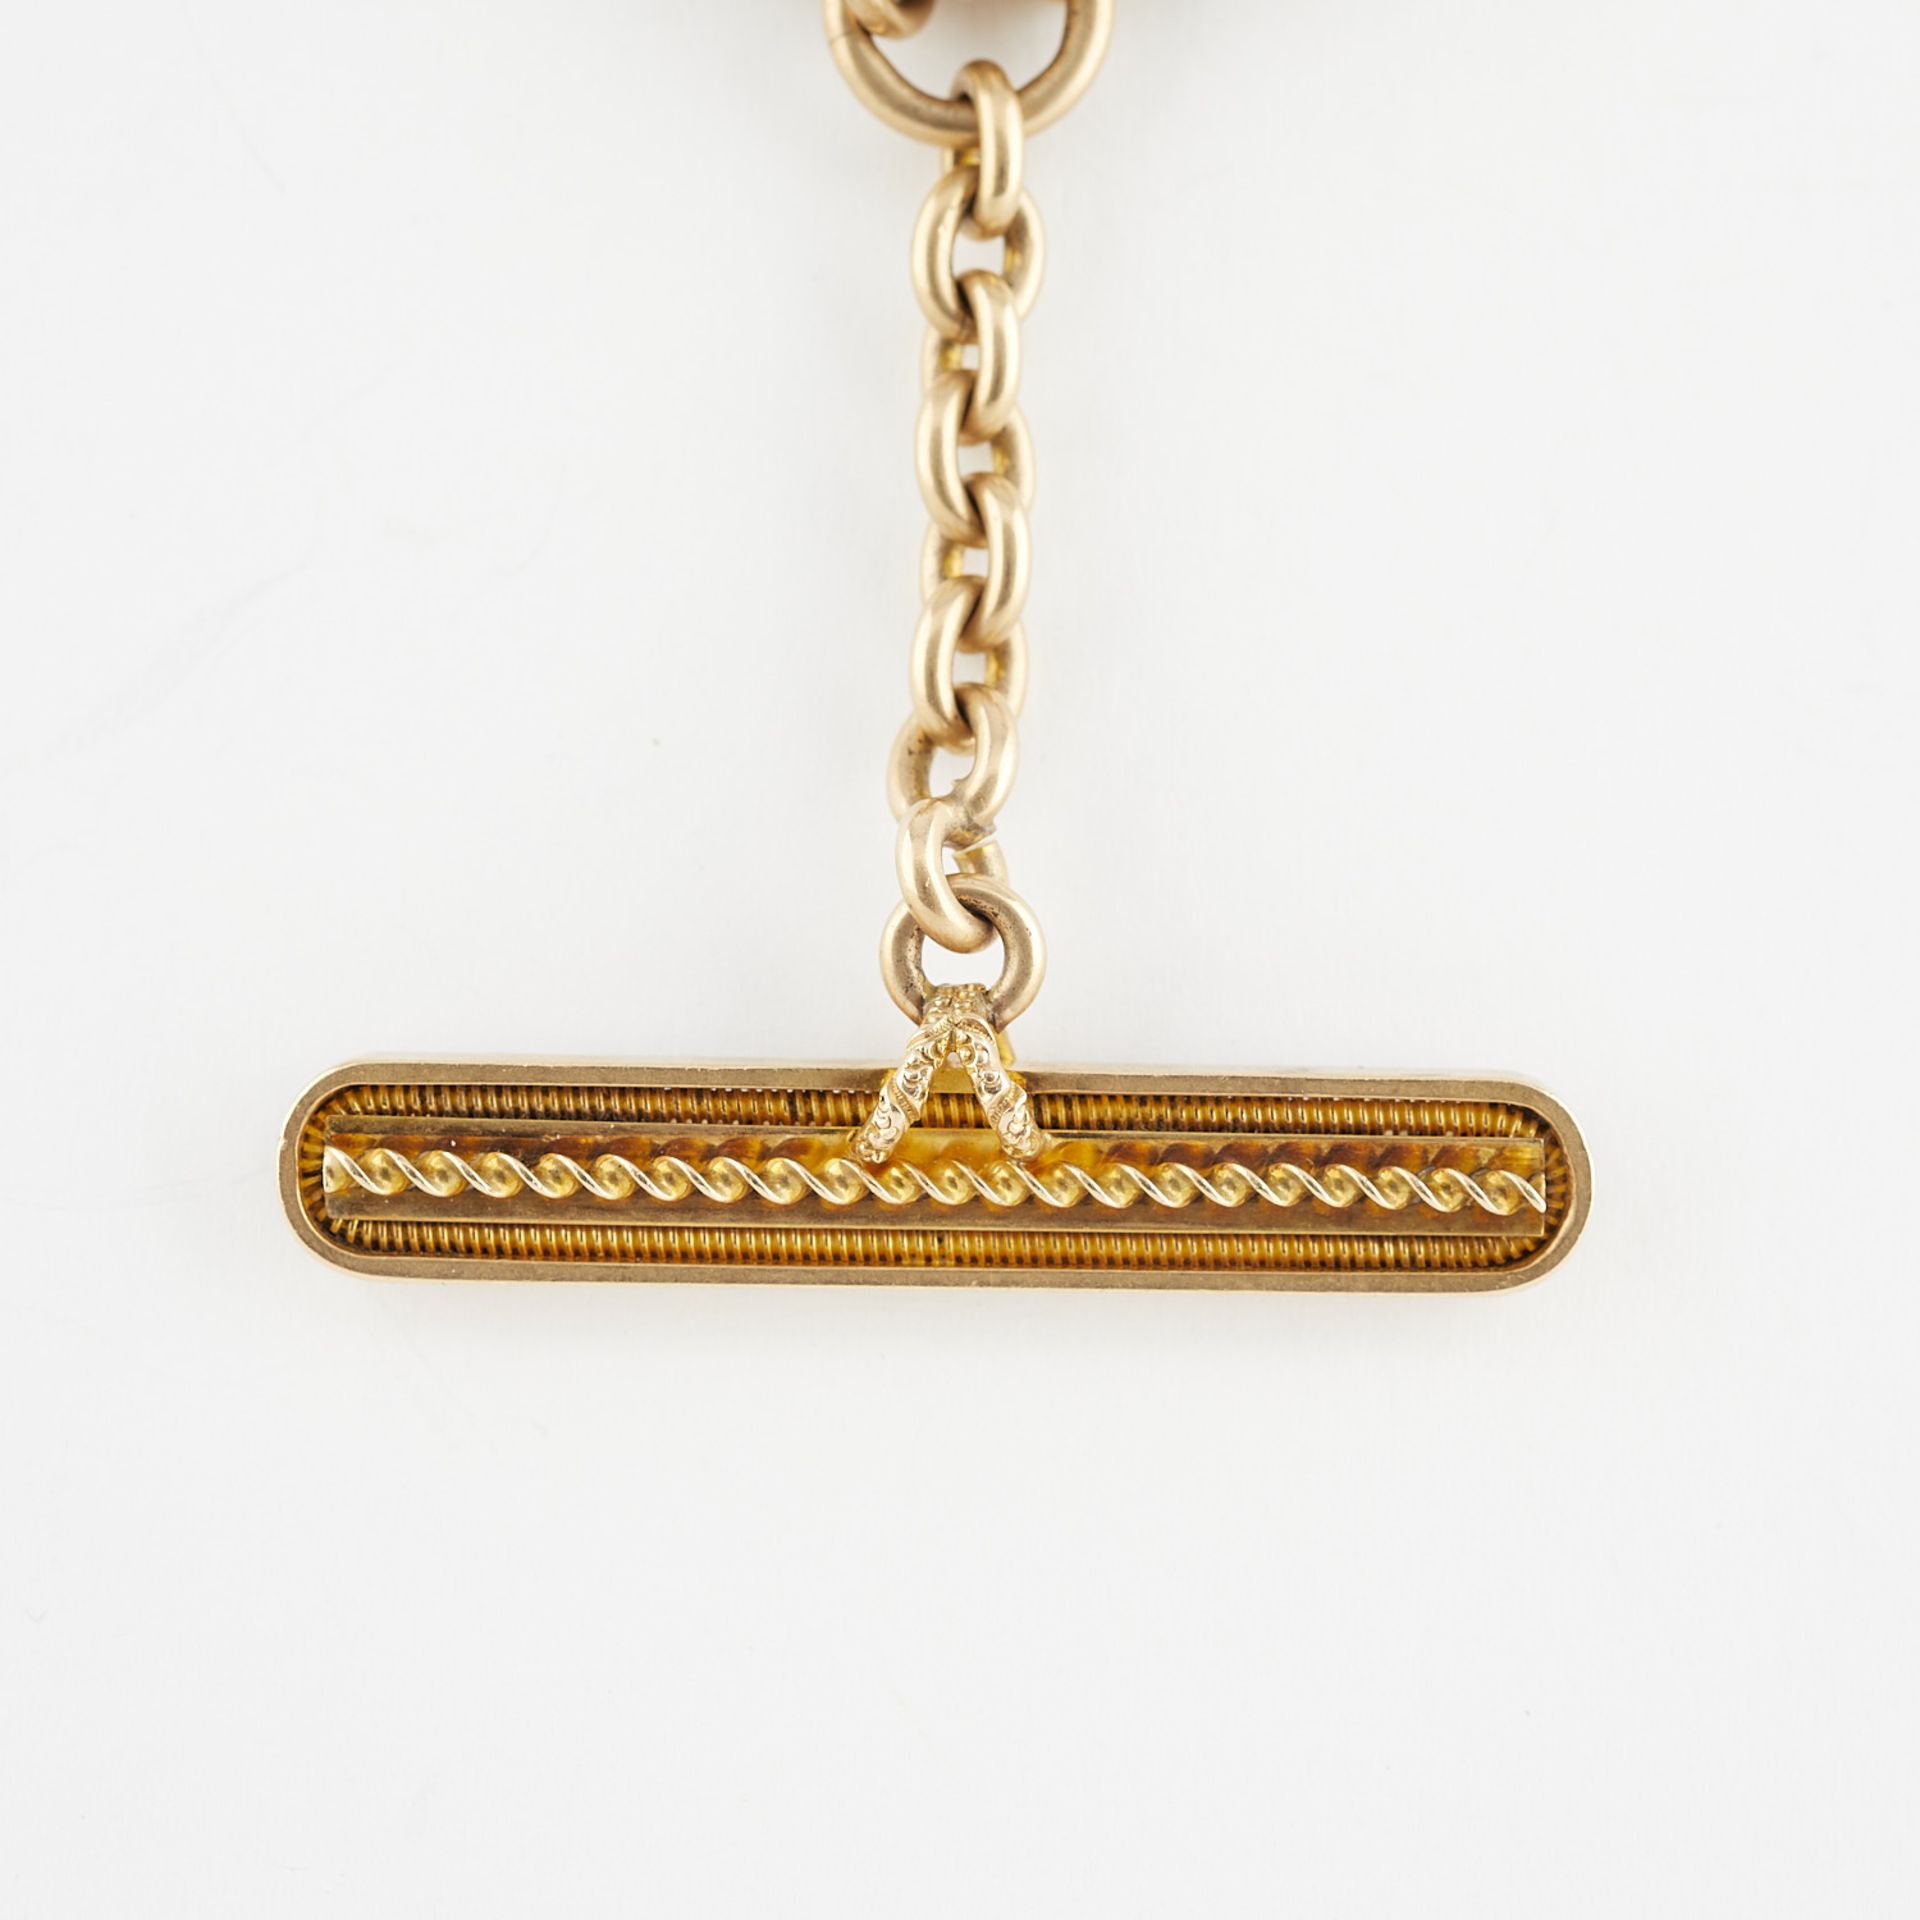 14k Gold Filled Watch Chain & Fob w/ Bloodstone - Image 6 of 6